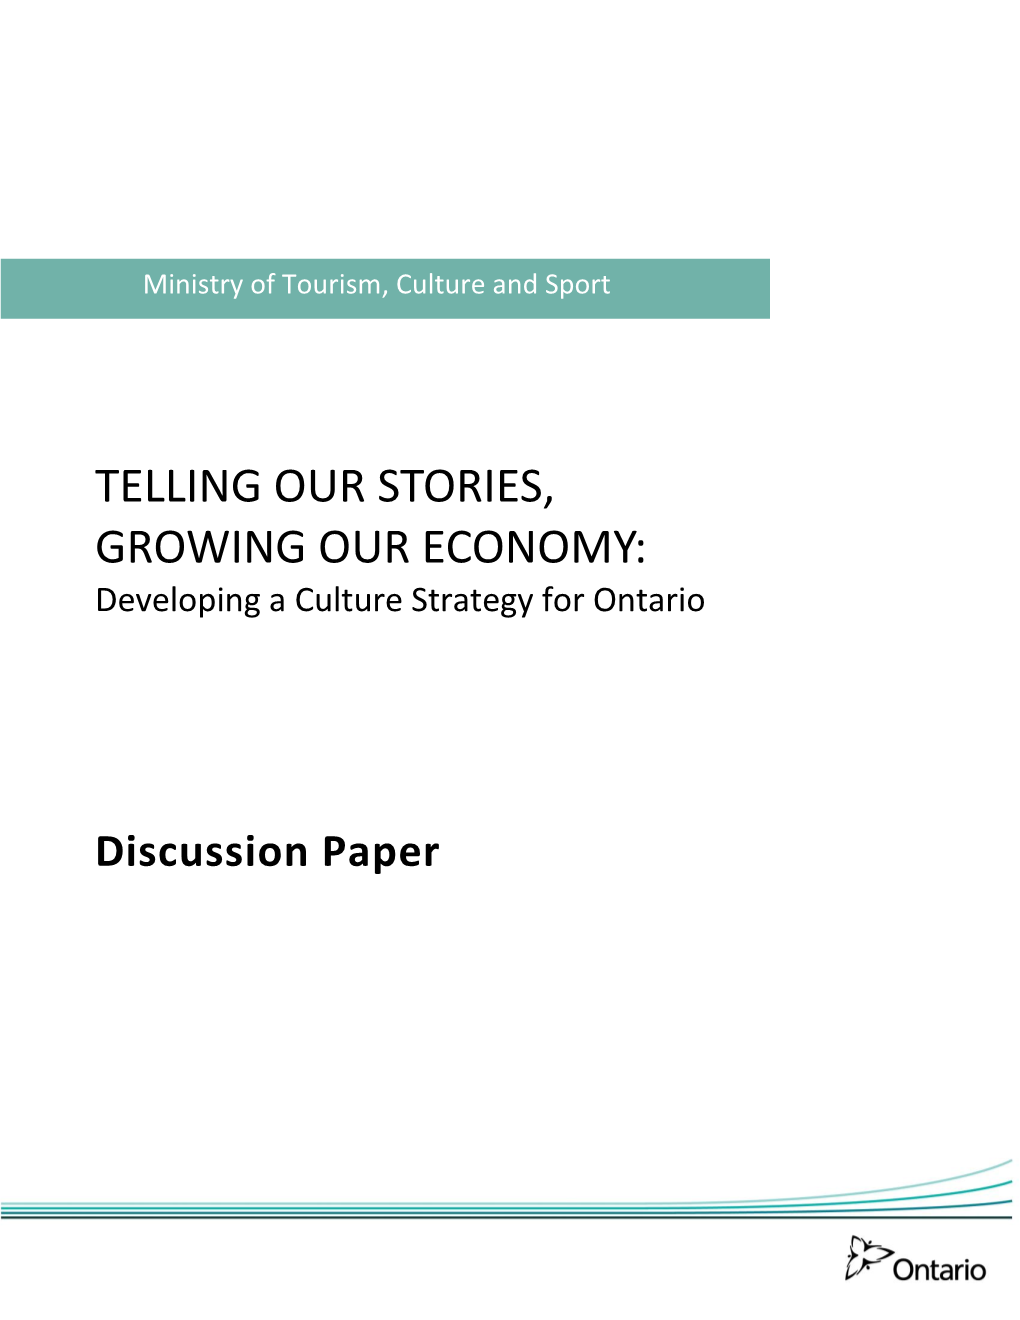 TELLING OUR STORIES, GROWING OUR ECONOMY: Developing a Culture Strategy for Ontario